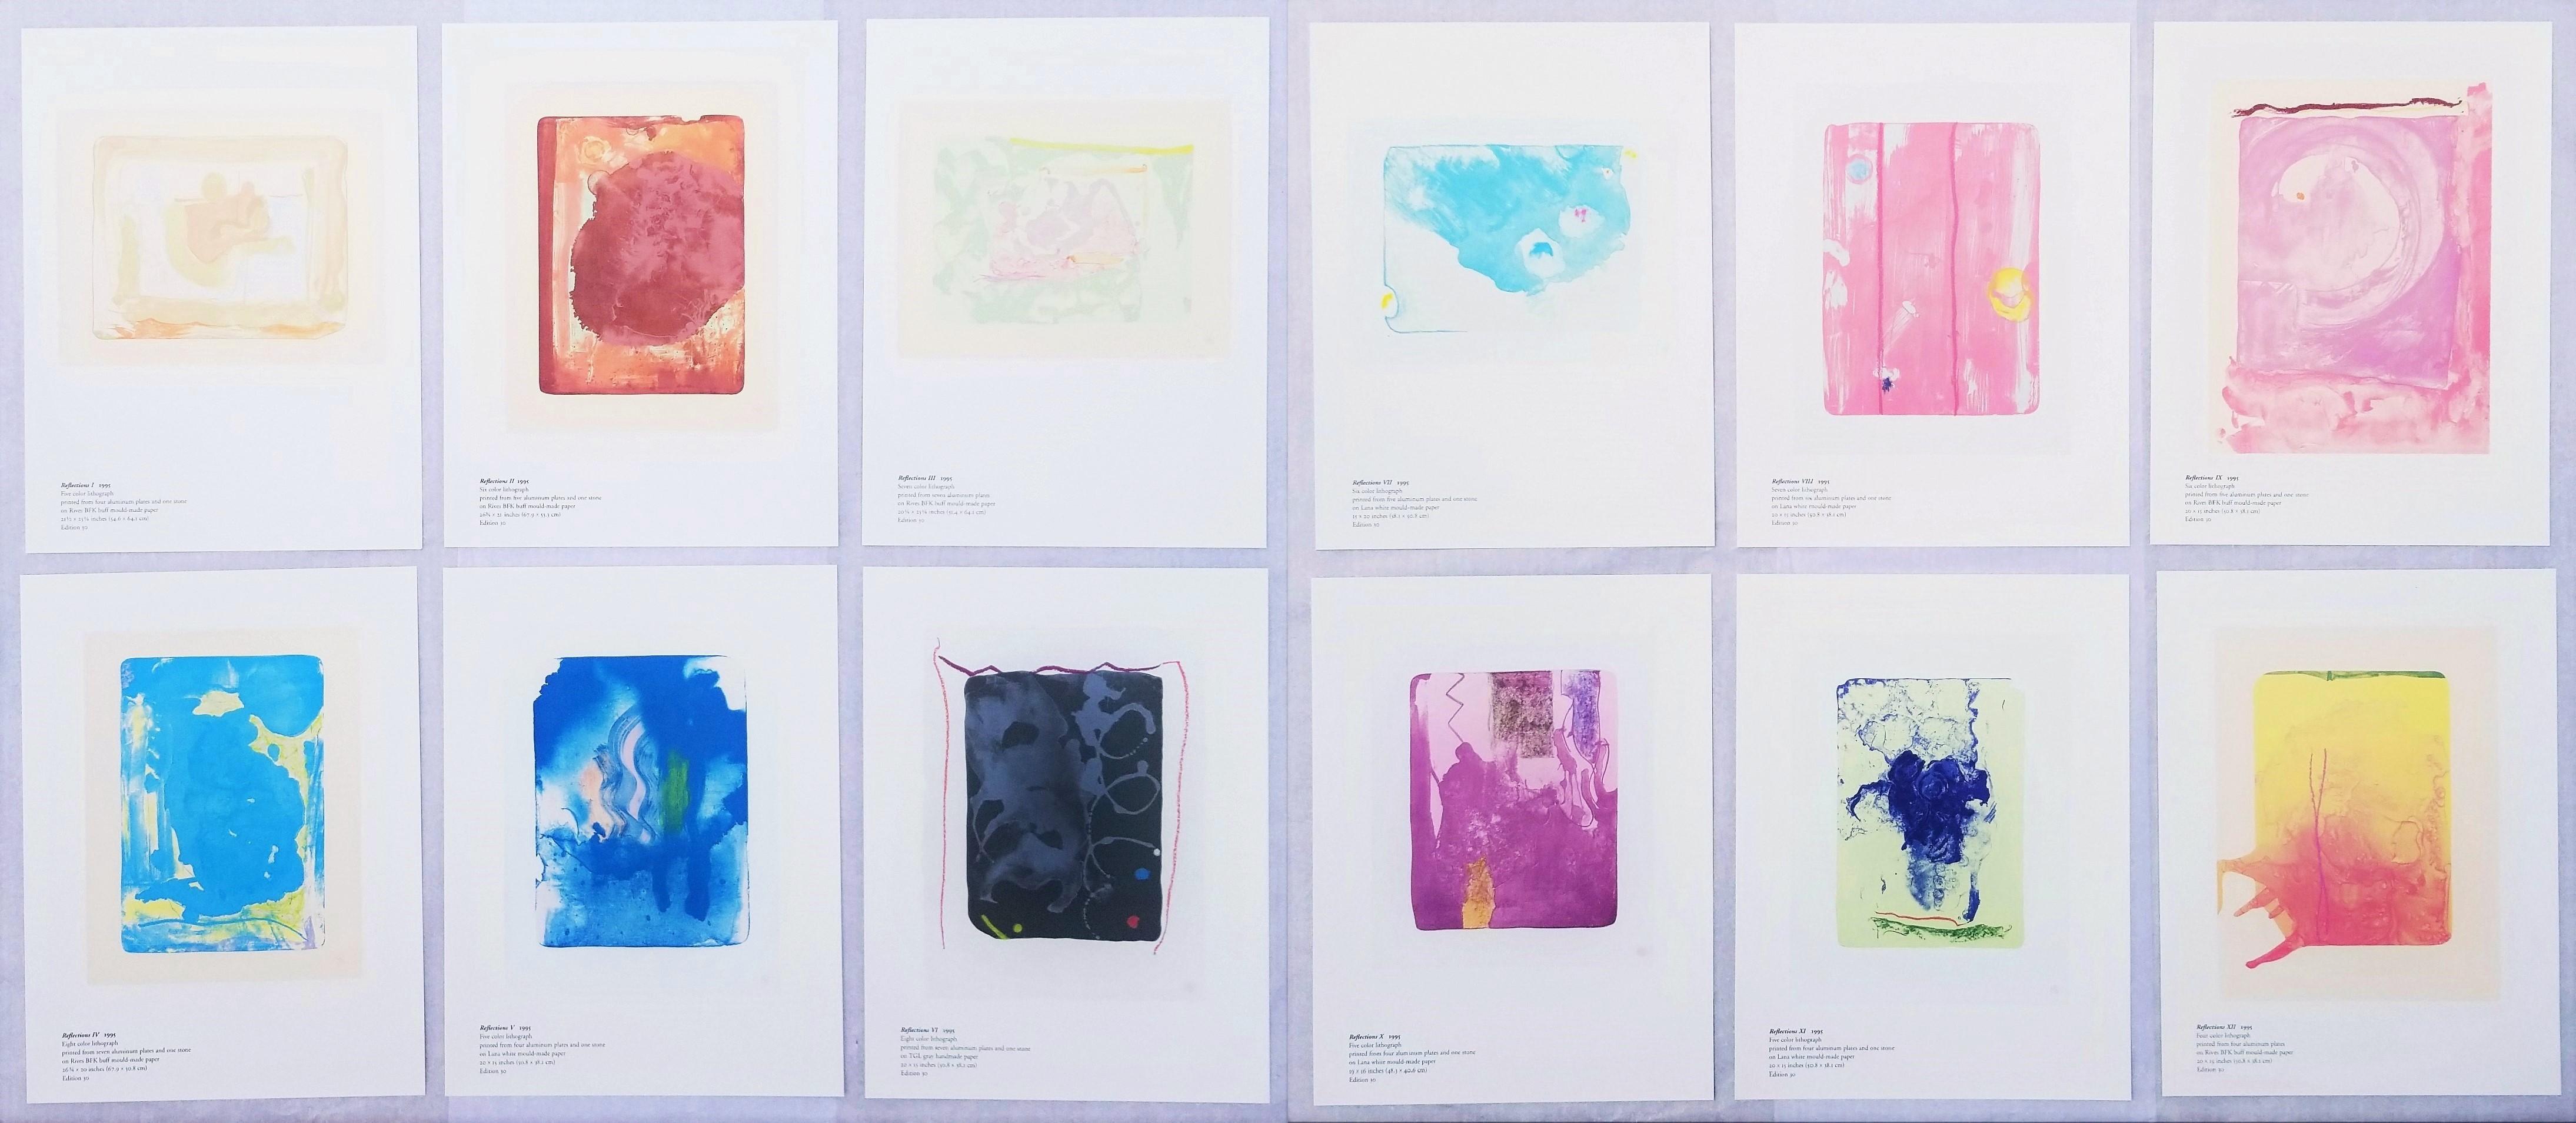 Artist: (after) Helen Frankenthaler (American, 1928-2011)
Title: "Helen Frankenthaler: Reflections (Catalog of 12 Prints)"
Series: (after) Reflections
*Issued unsigned
Year: 1995
Medium: The Complete Set of 12 Offset-Lithograph reproductions on